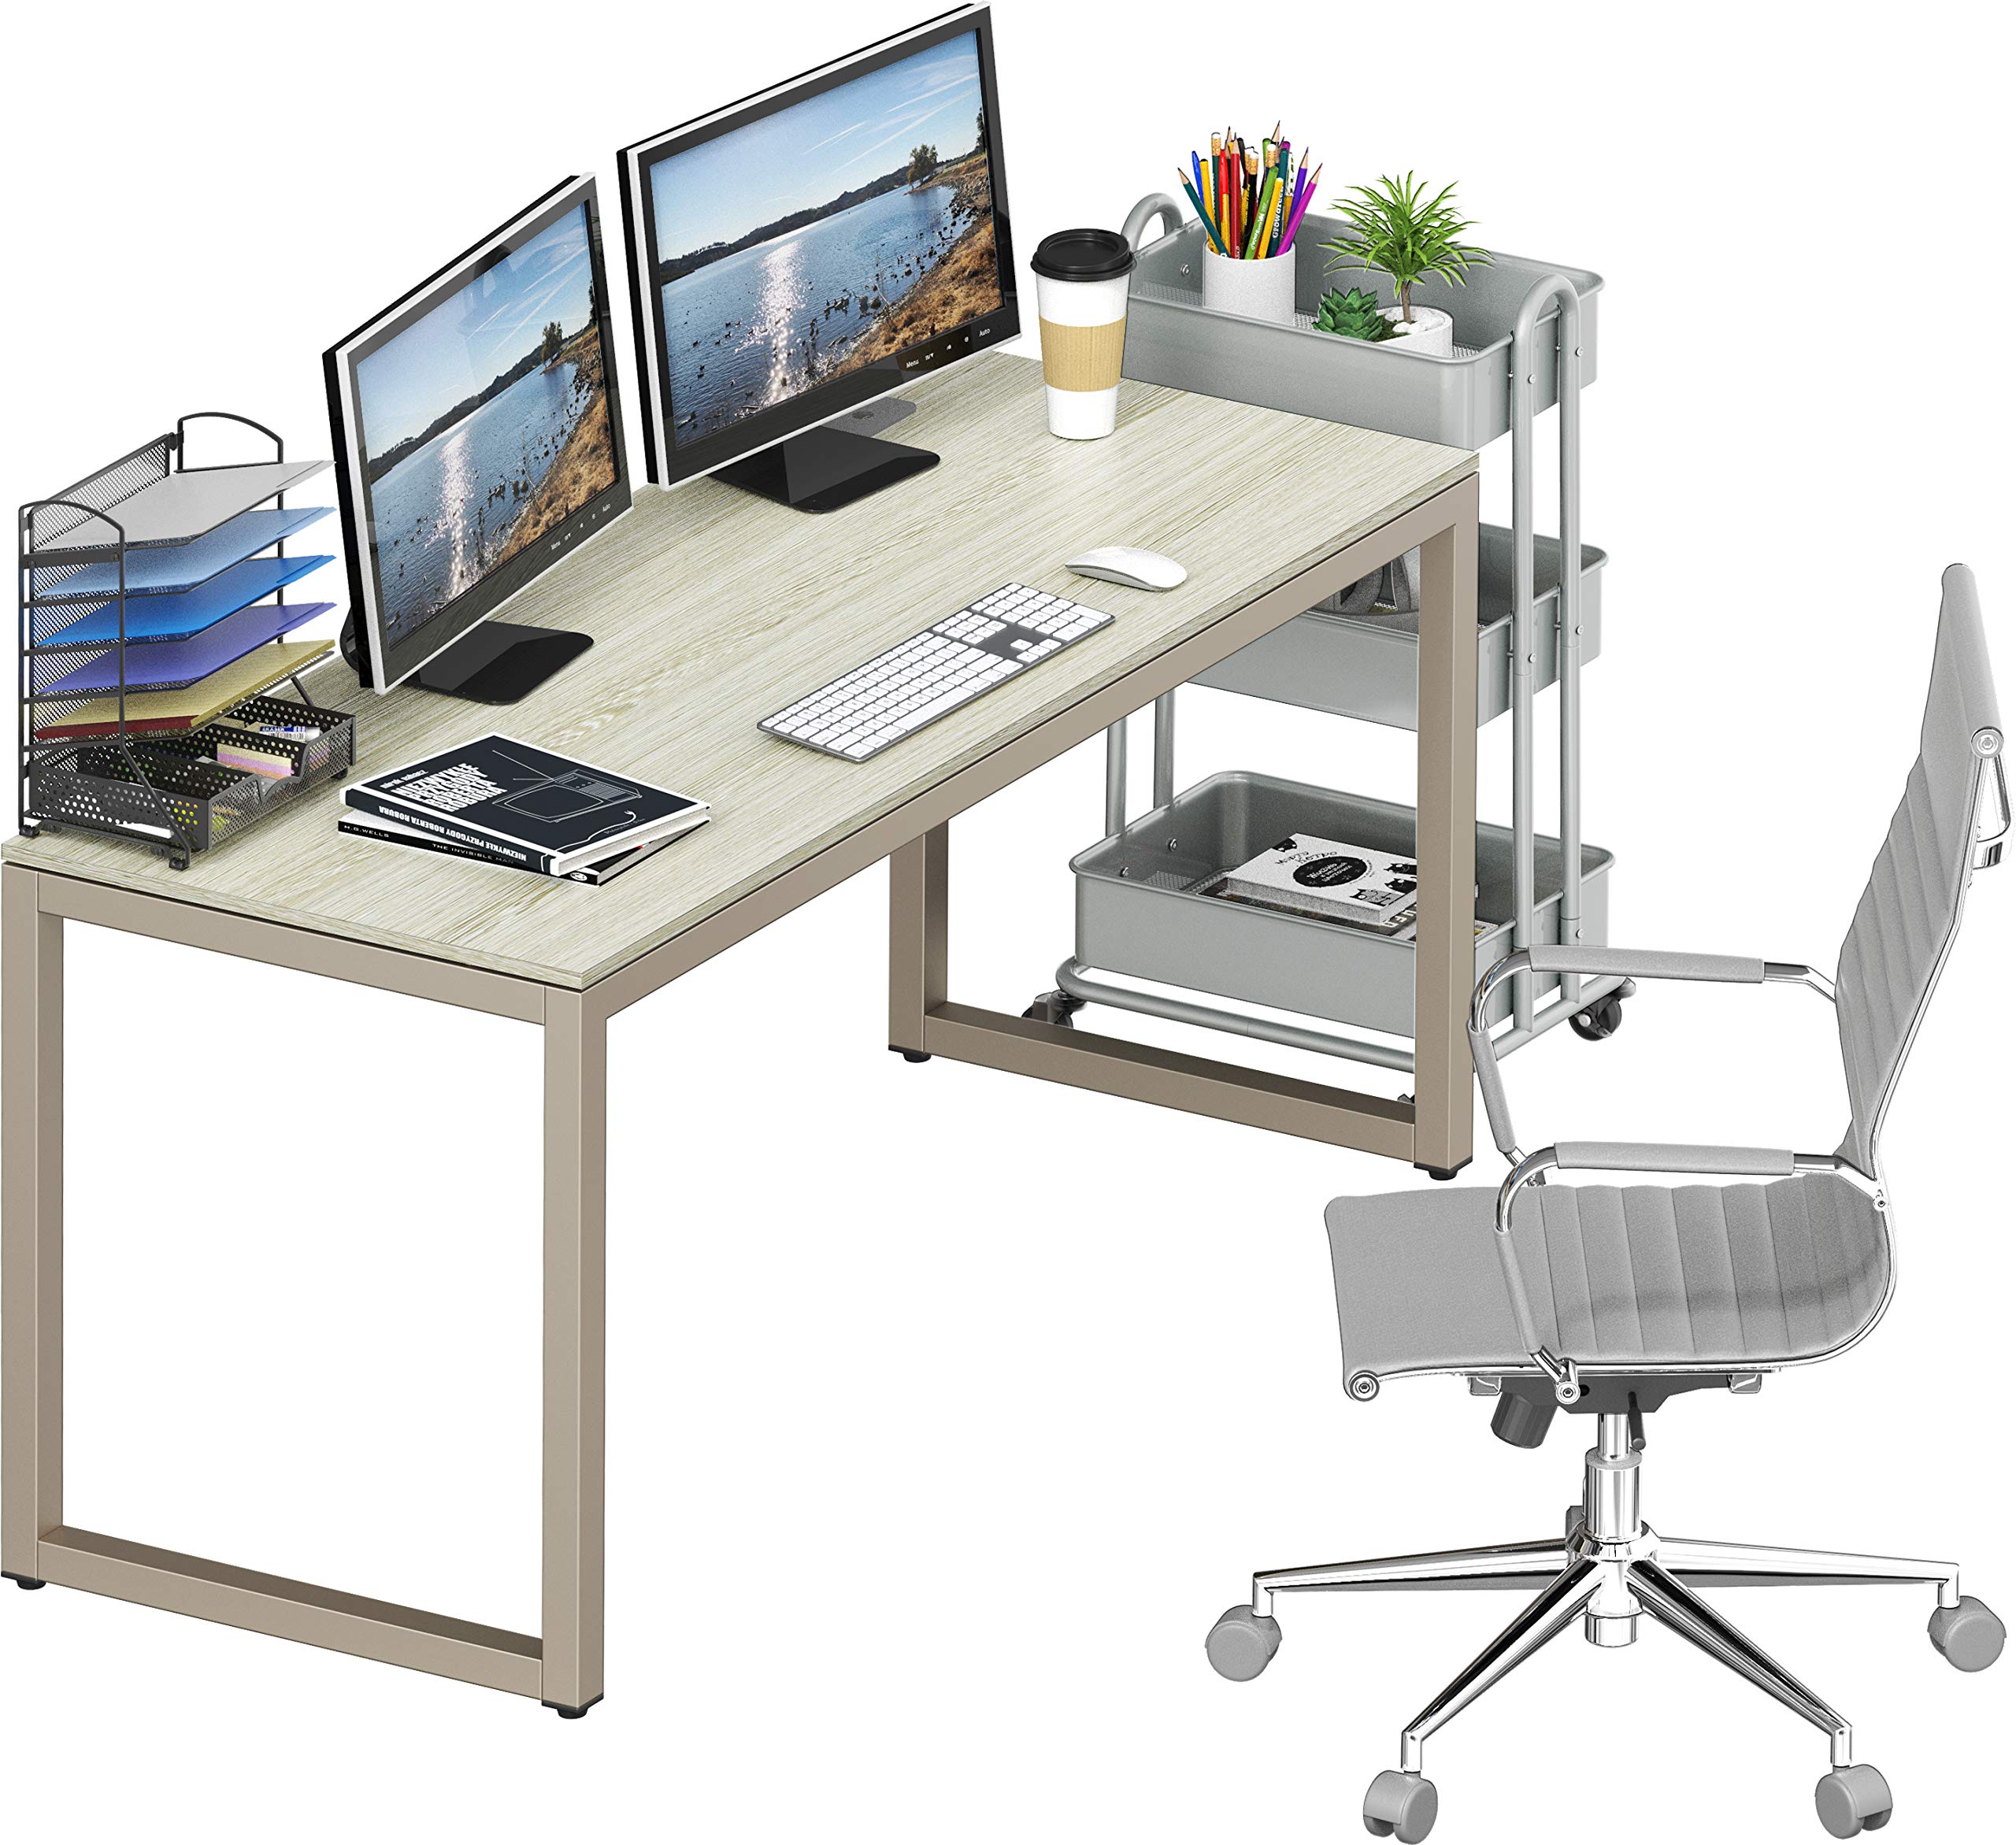 SHW Home Office 55-Inch Large Computer Desk, Maple